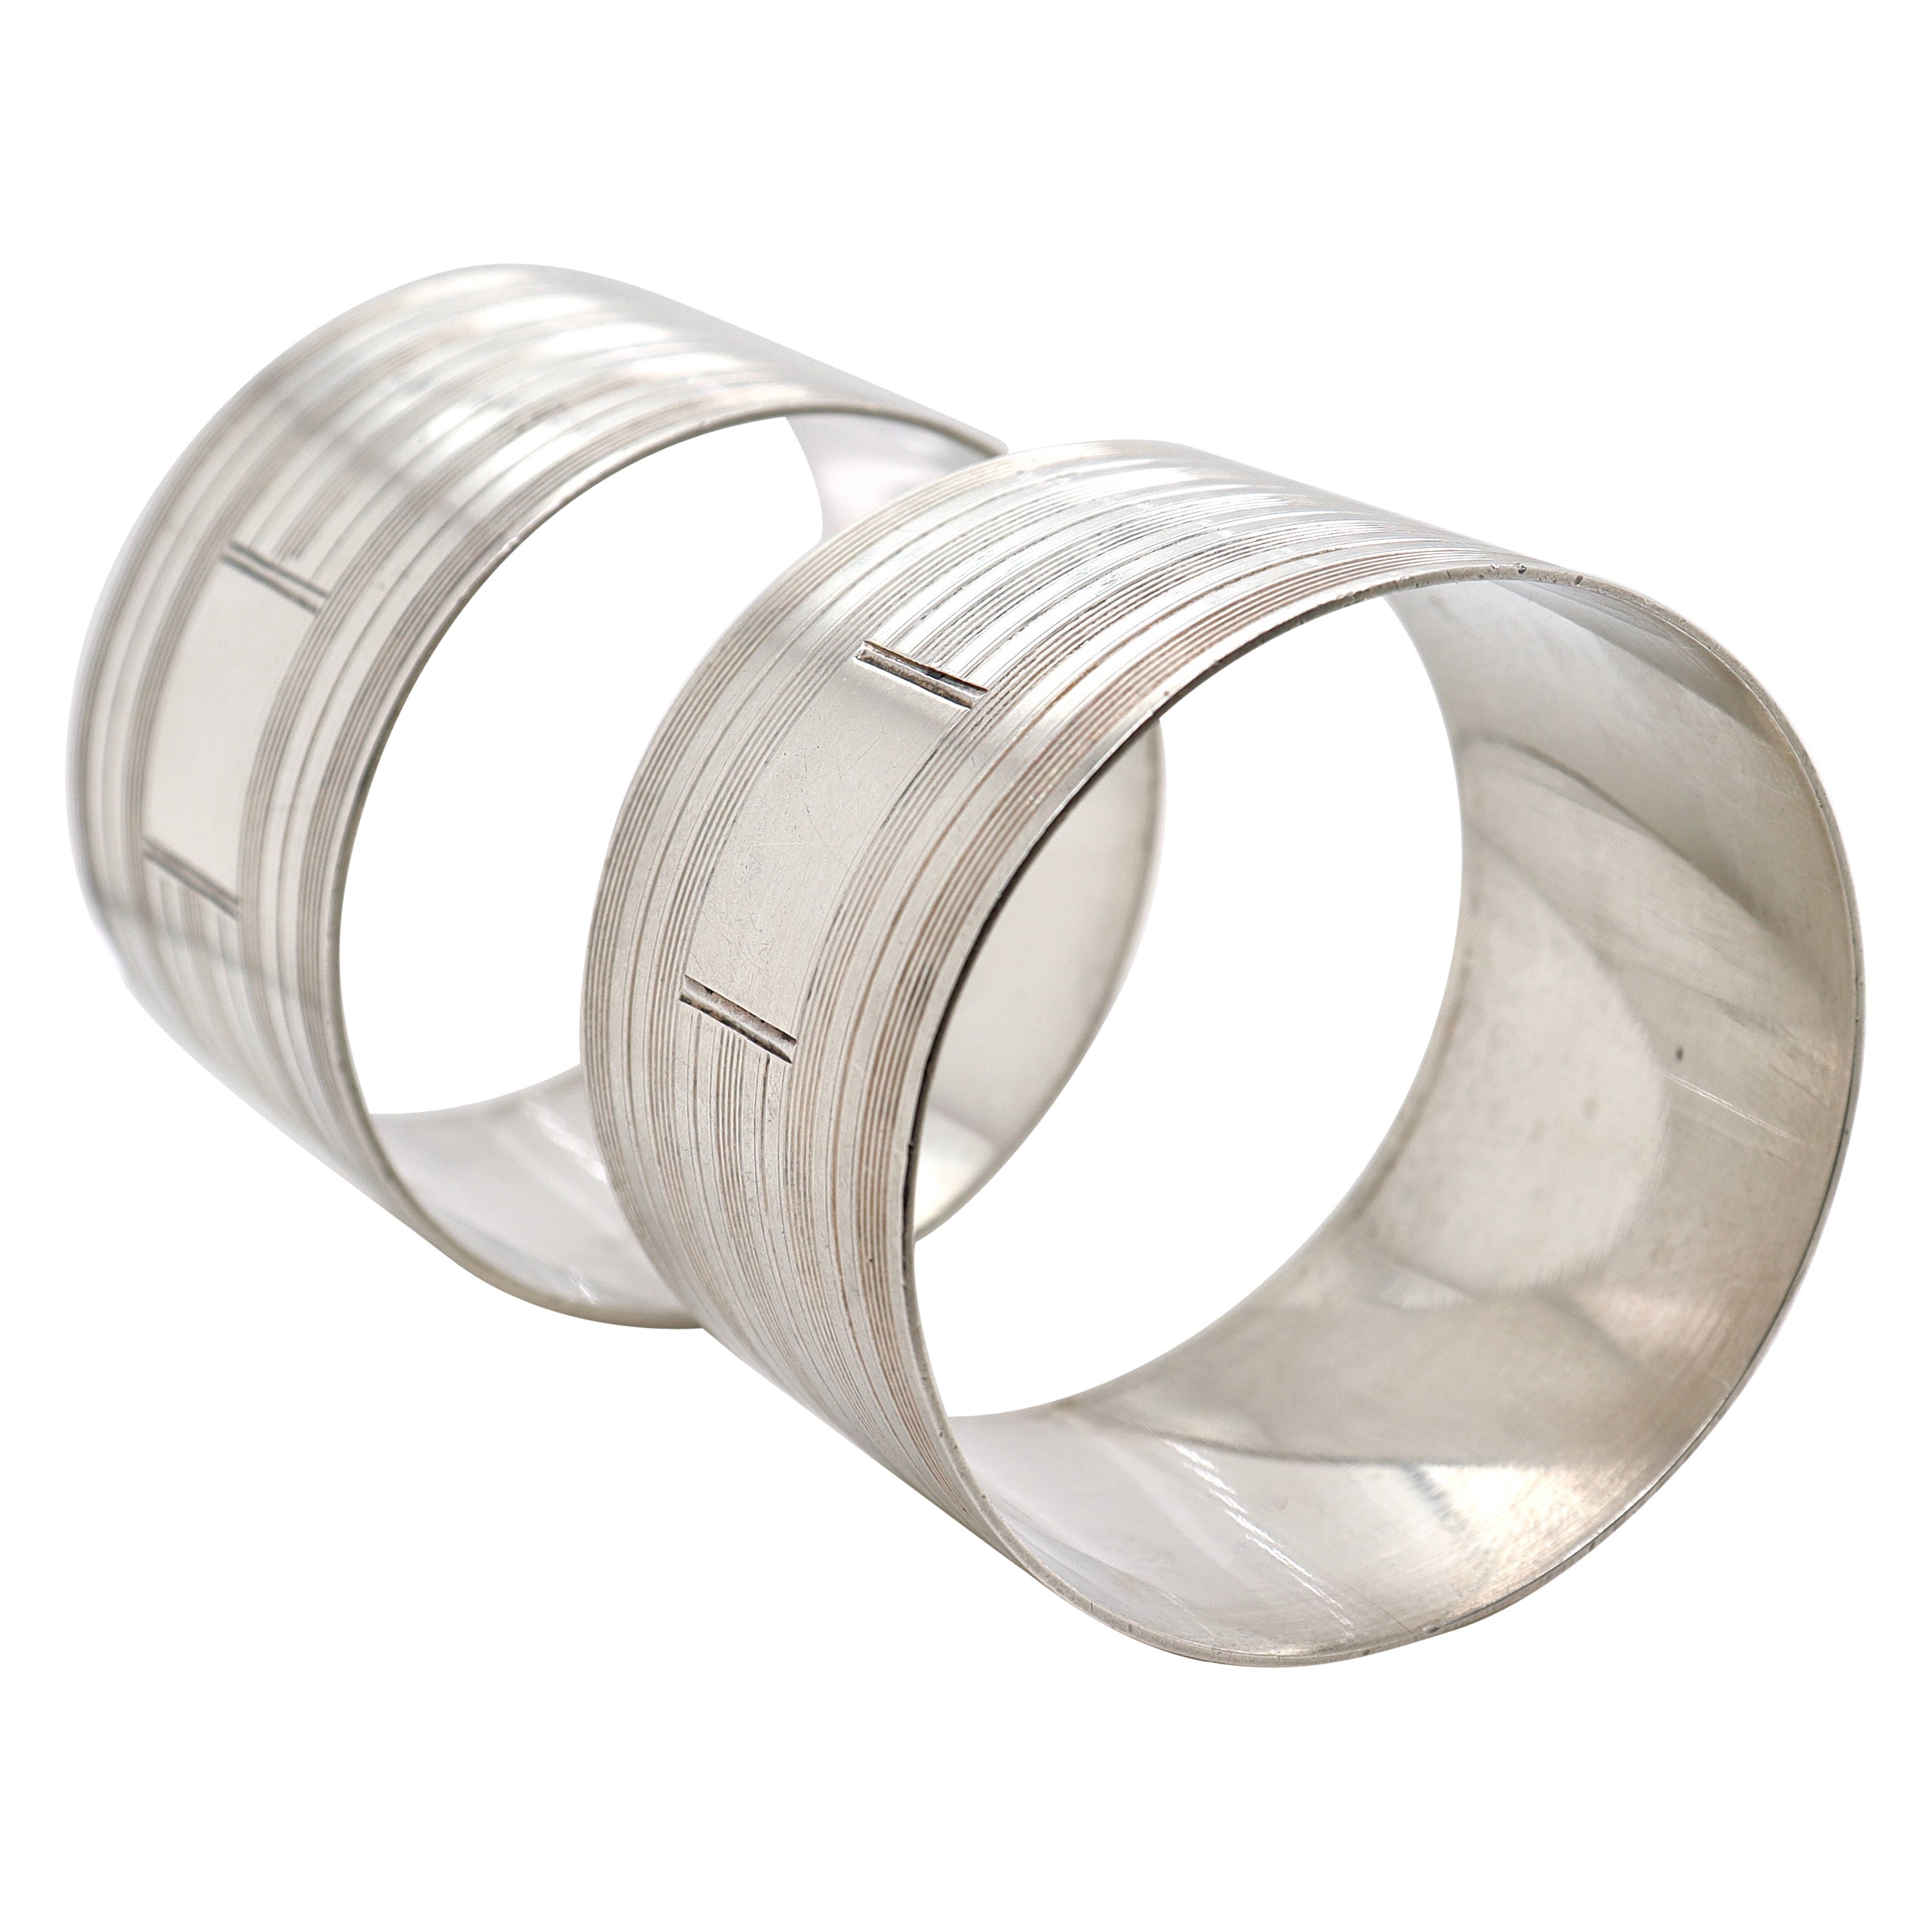 Pair Midcentury English Engine Turned Sterling Silver Napkin Rings by John Rose